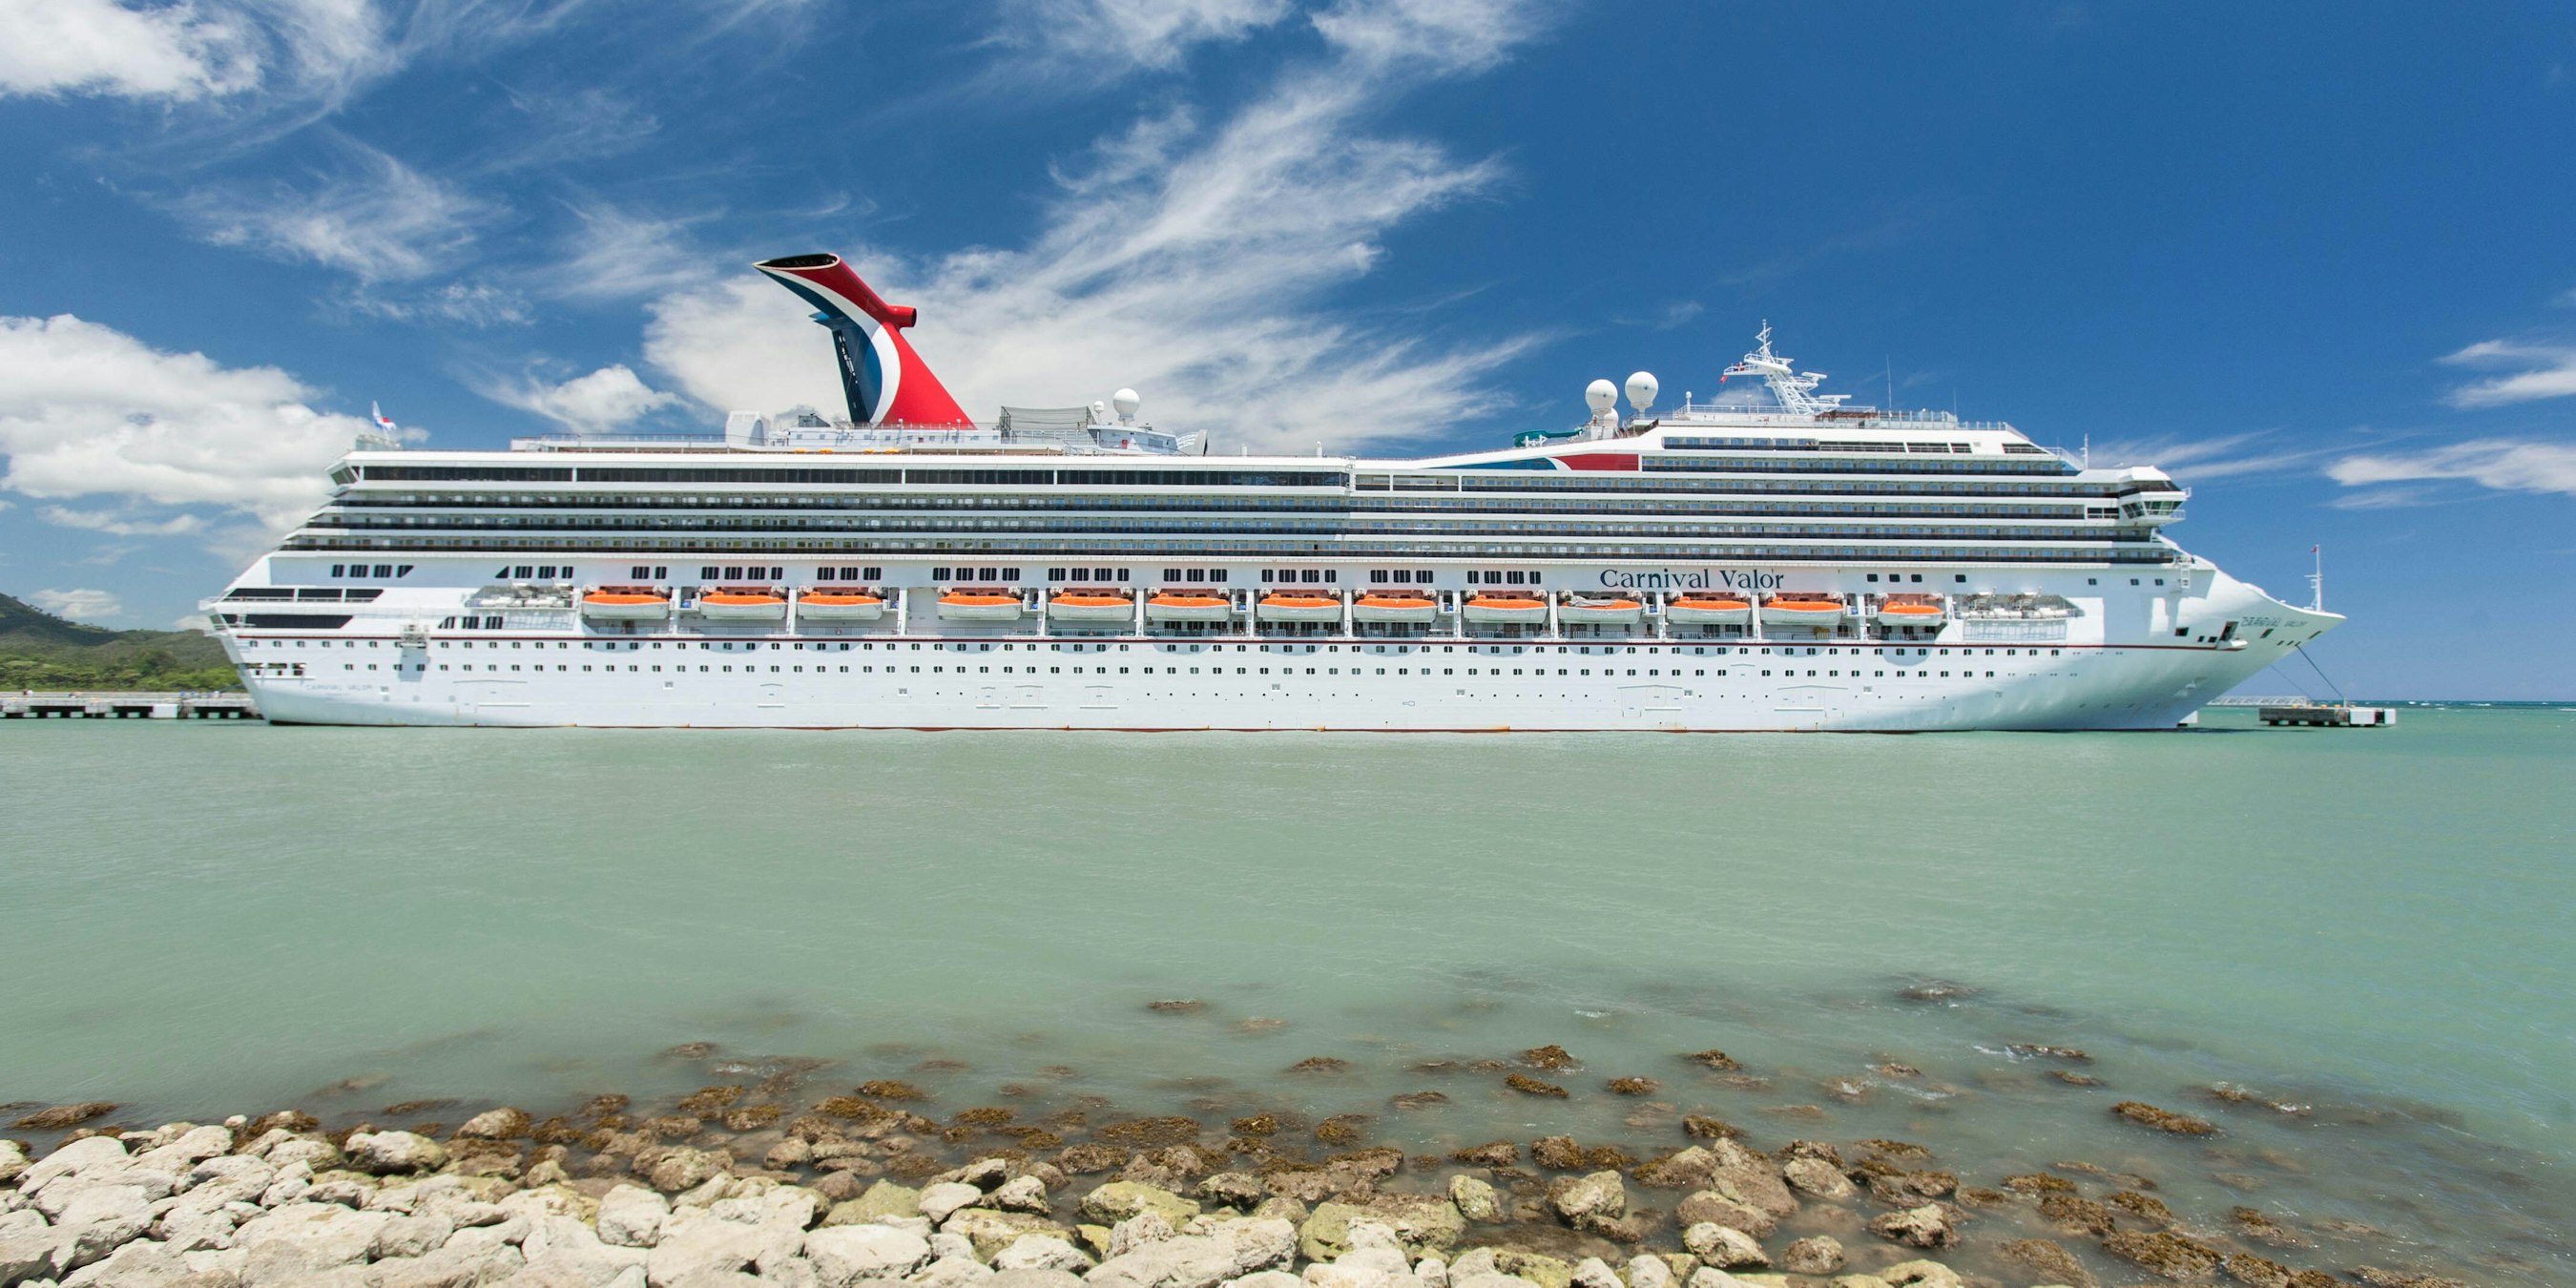 carnival valor 5 day cruise